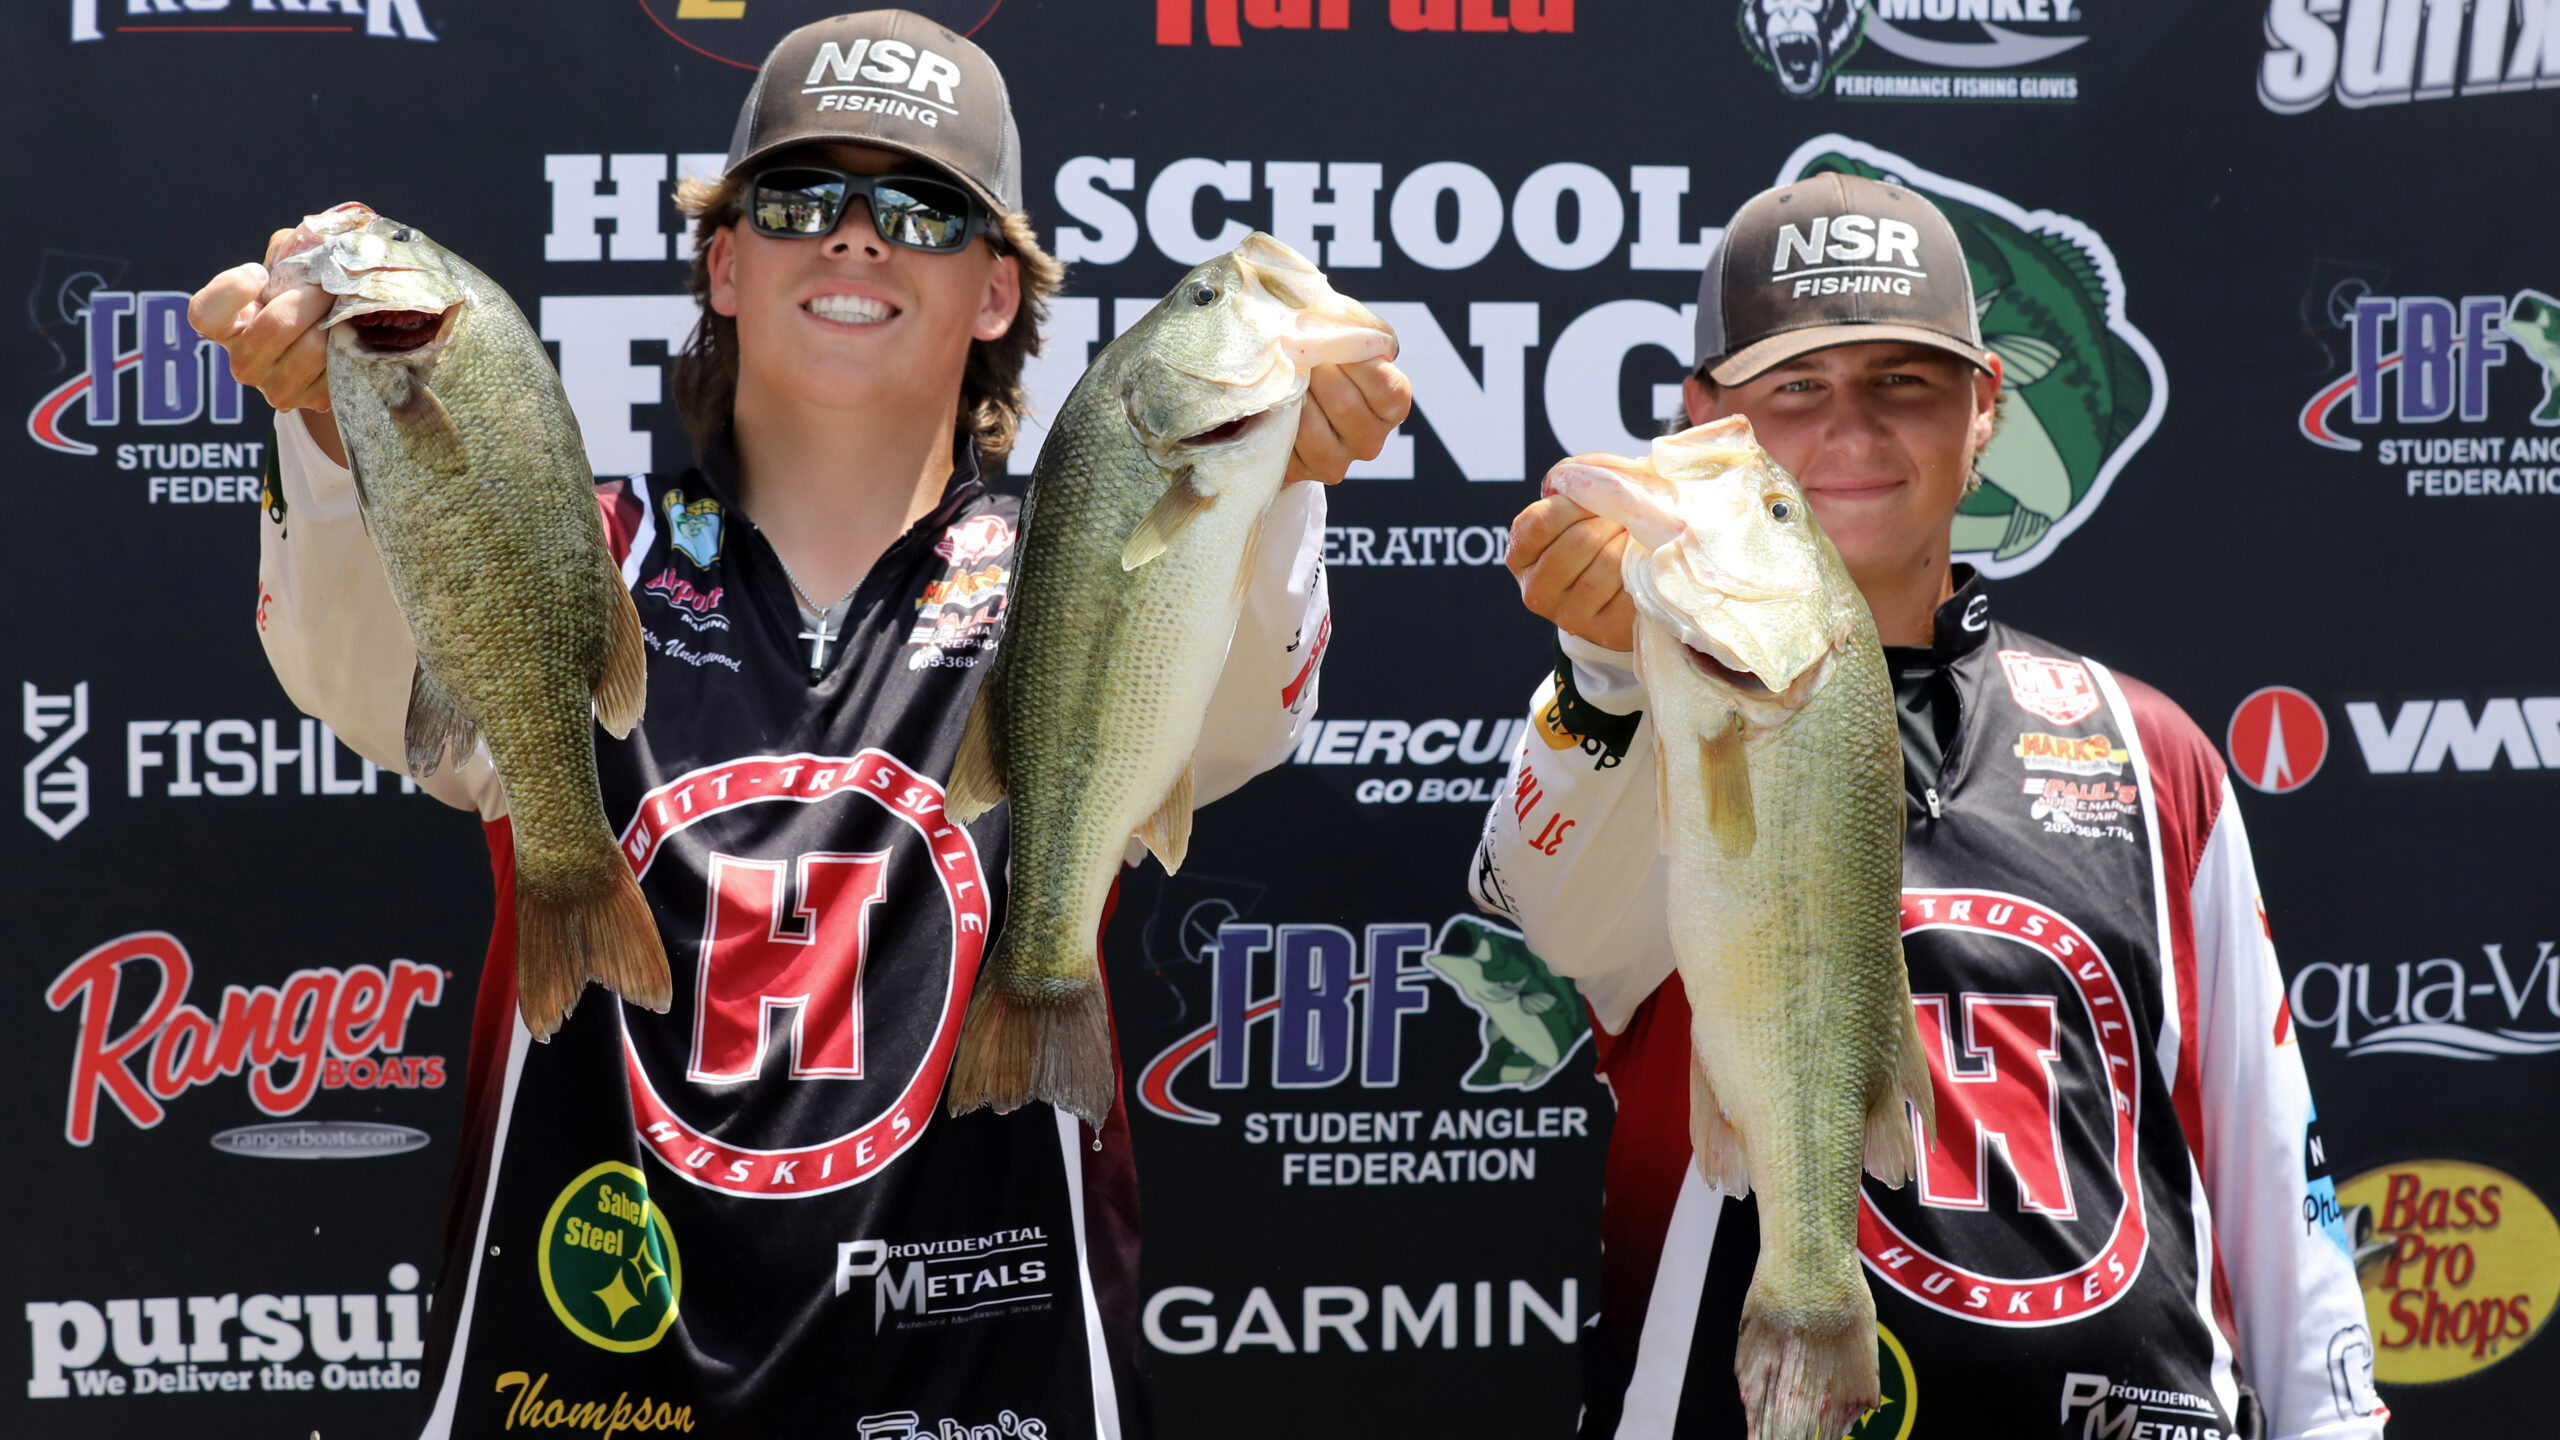 GALLERY: High School National Championship on Pickwick Lake - Day 2  Weigh-In - Major League Fishing